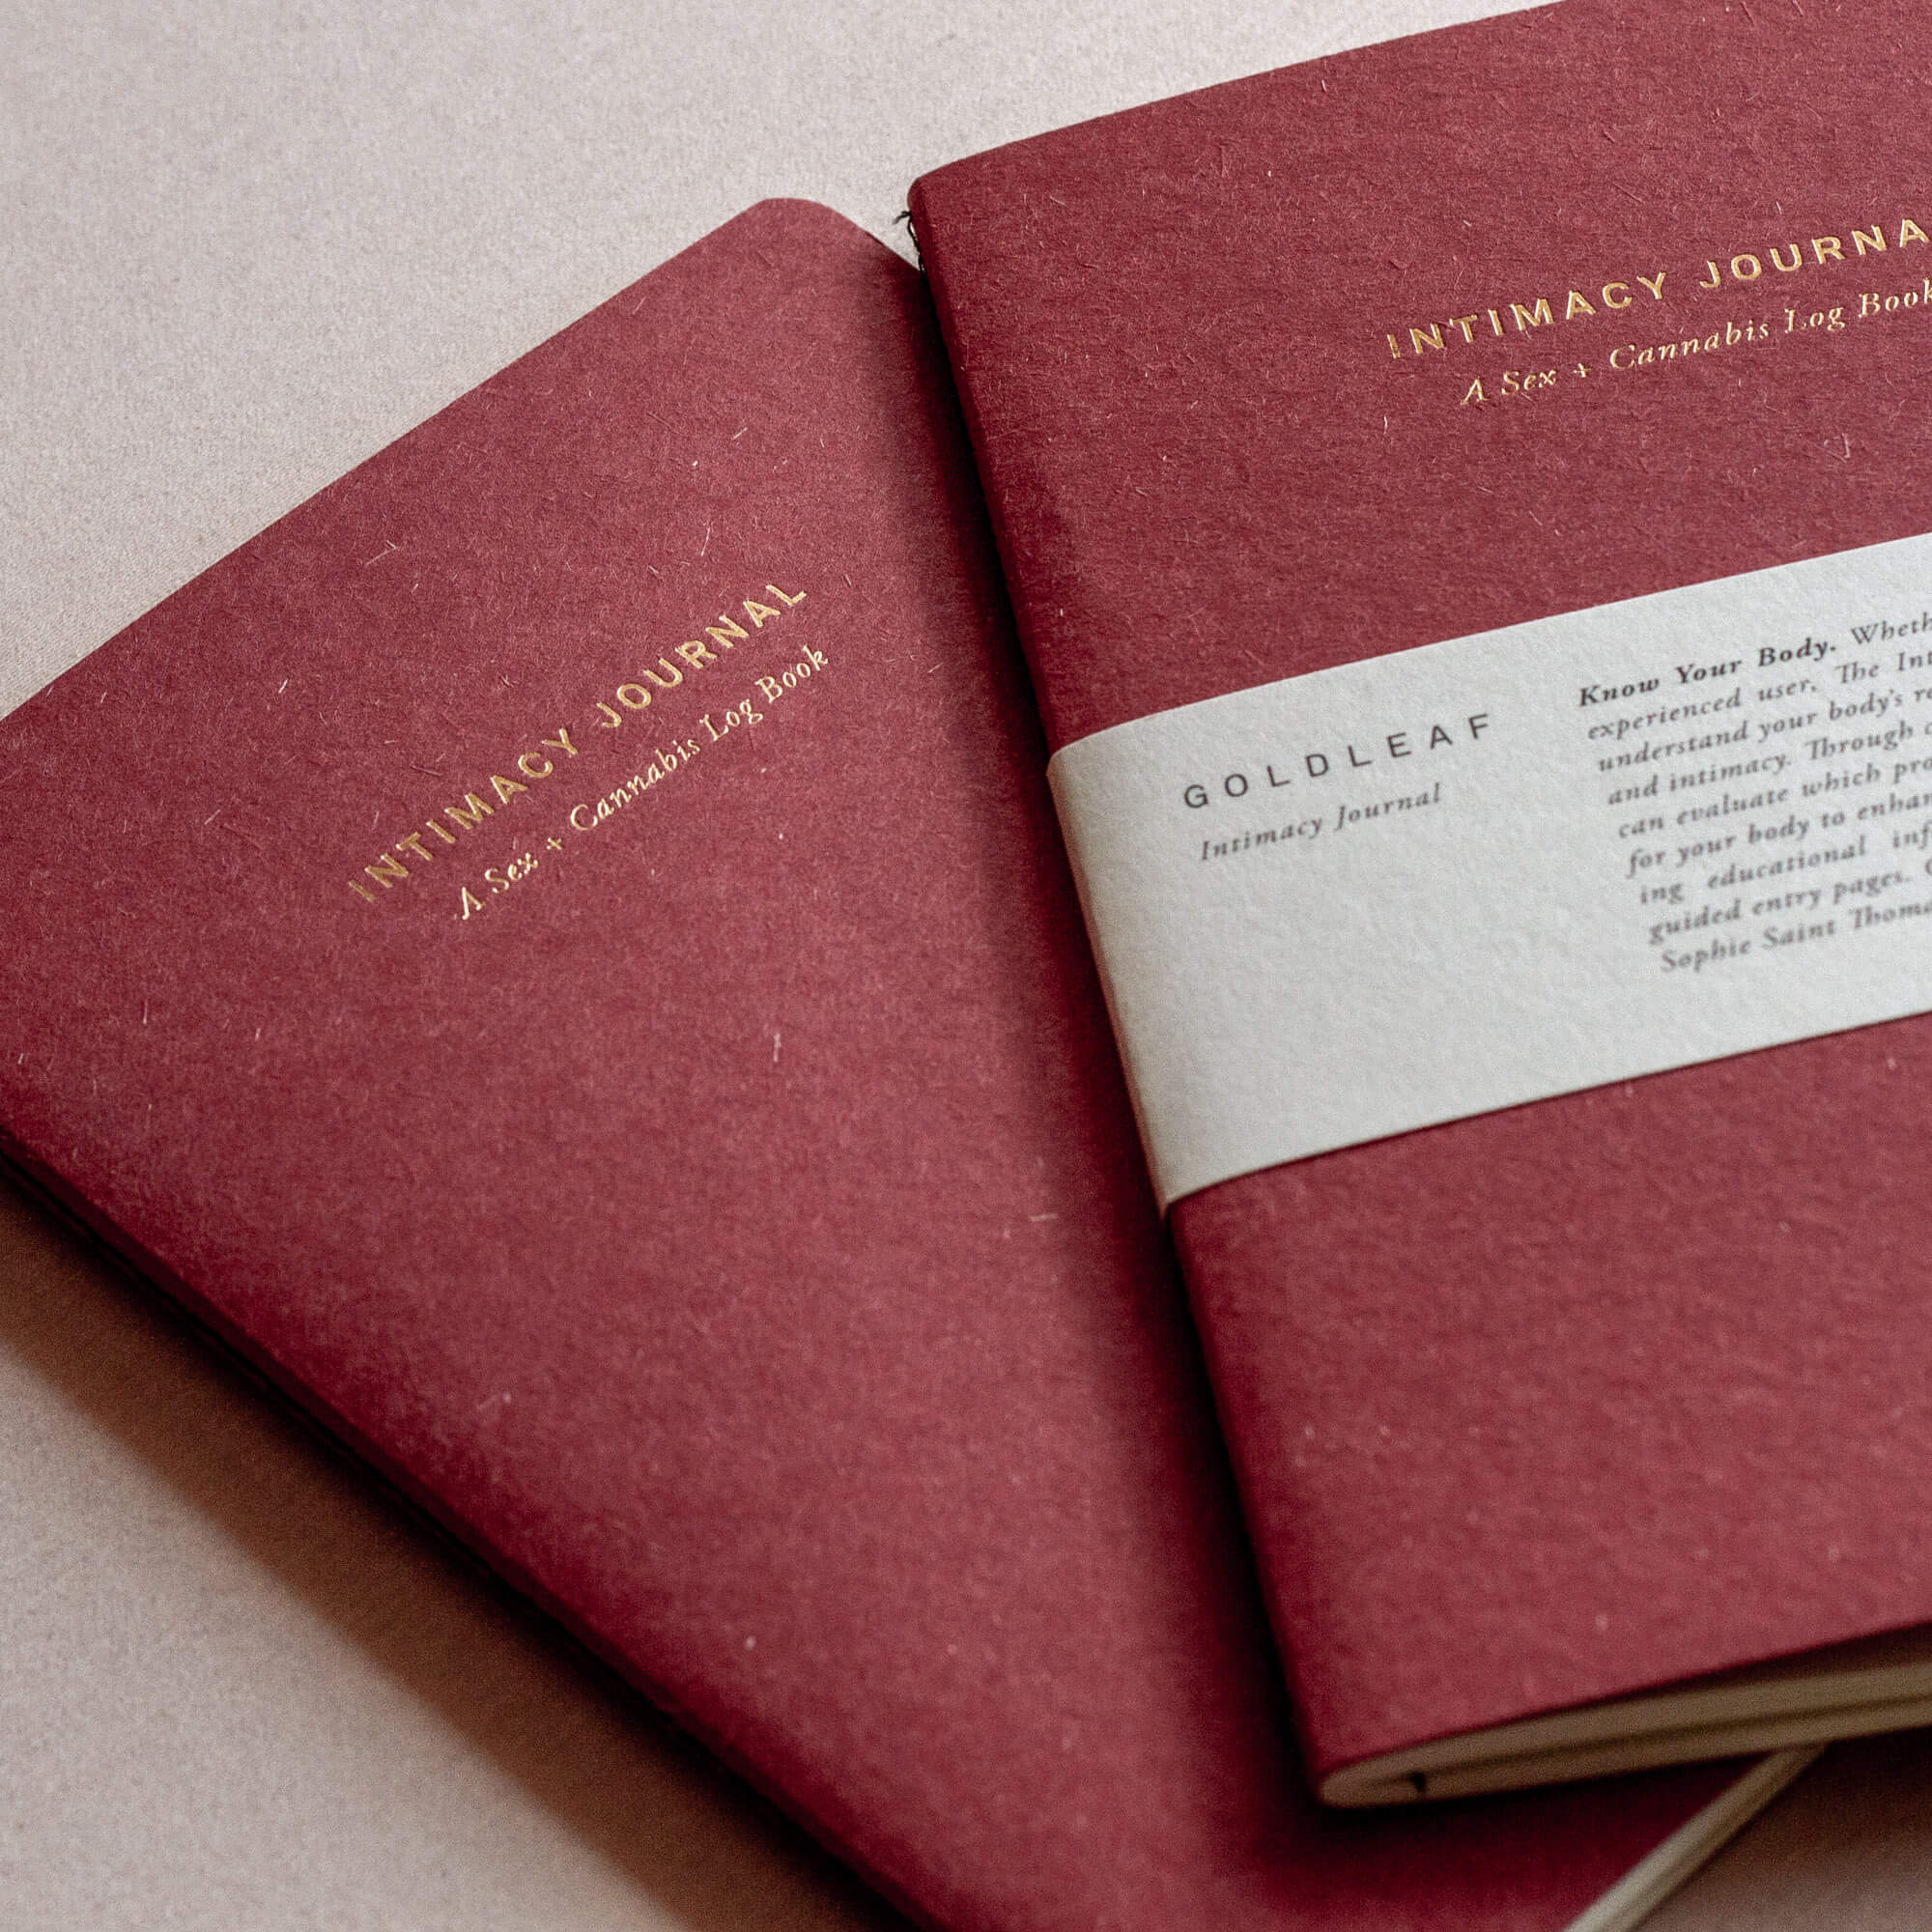 The Intimacy Journal by Goldleaf, Foria and Sophie Saint Thomas